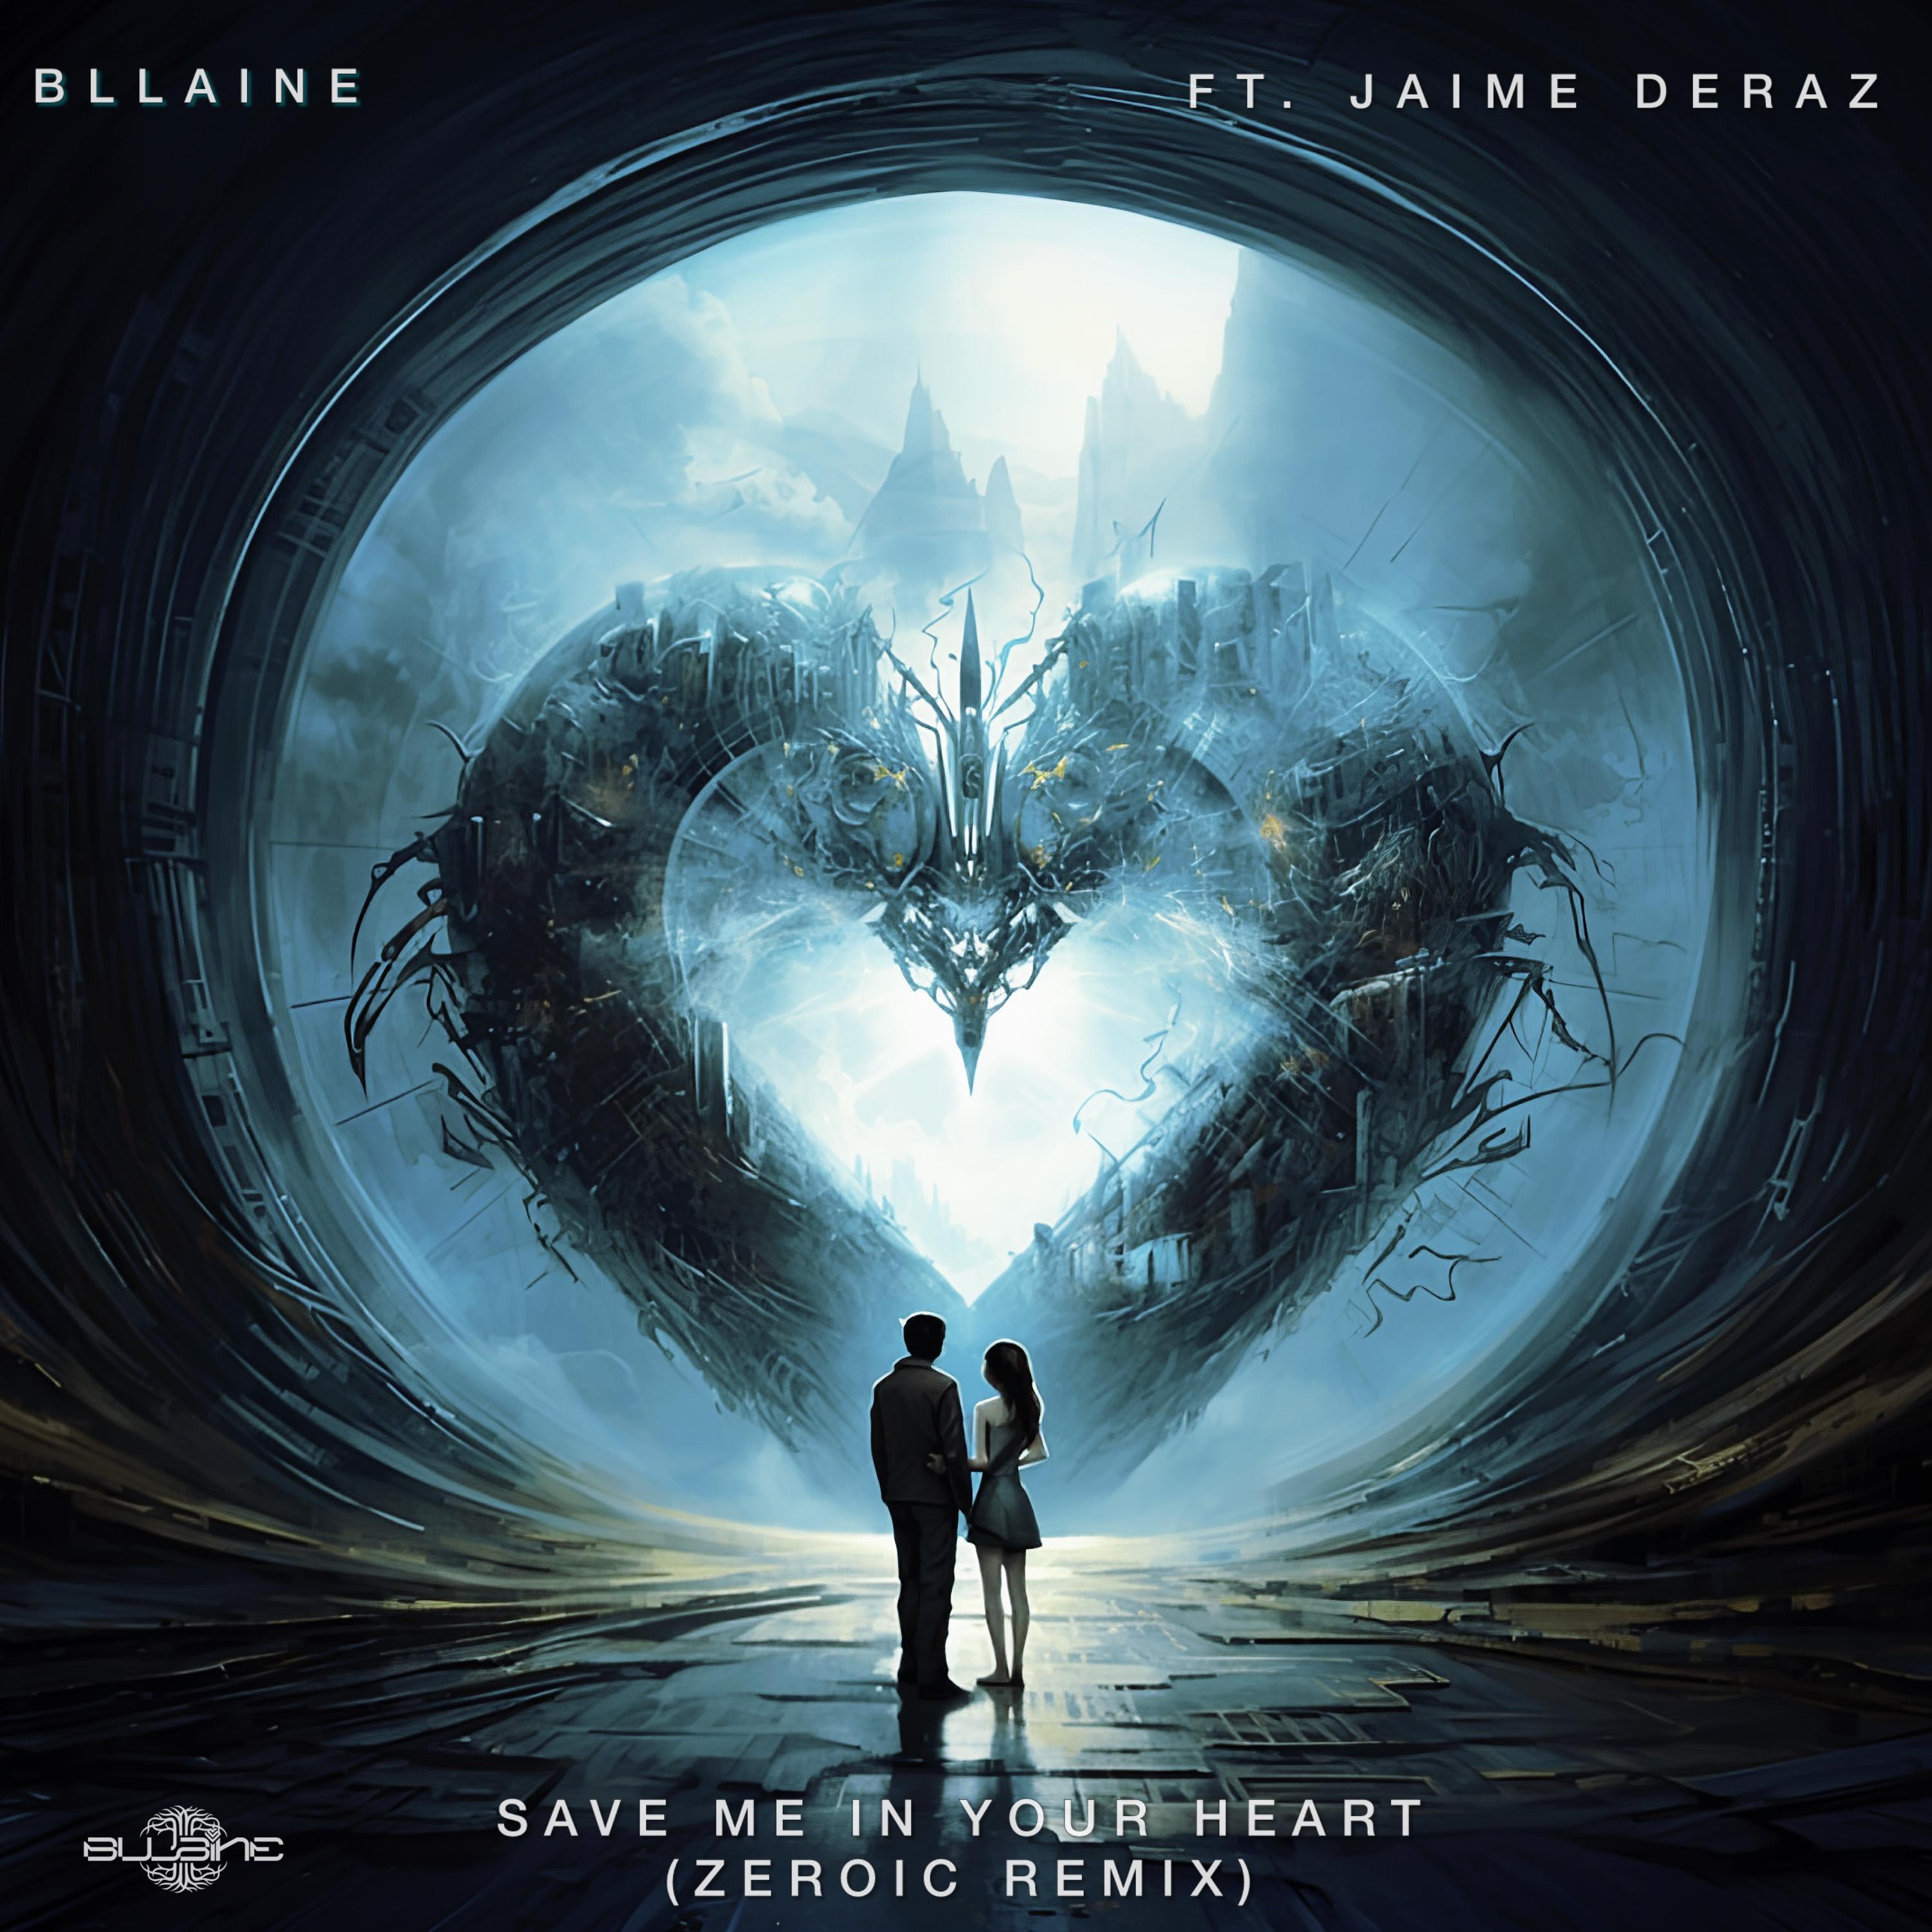 Bllaine - Save Me In Your Heart